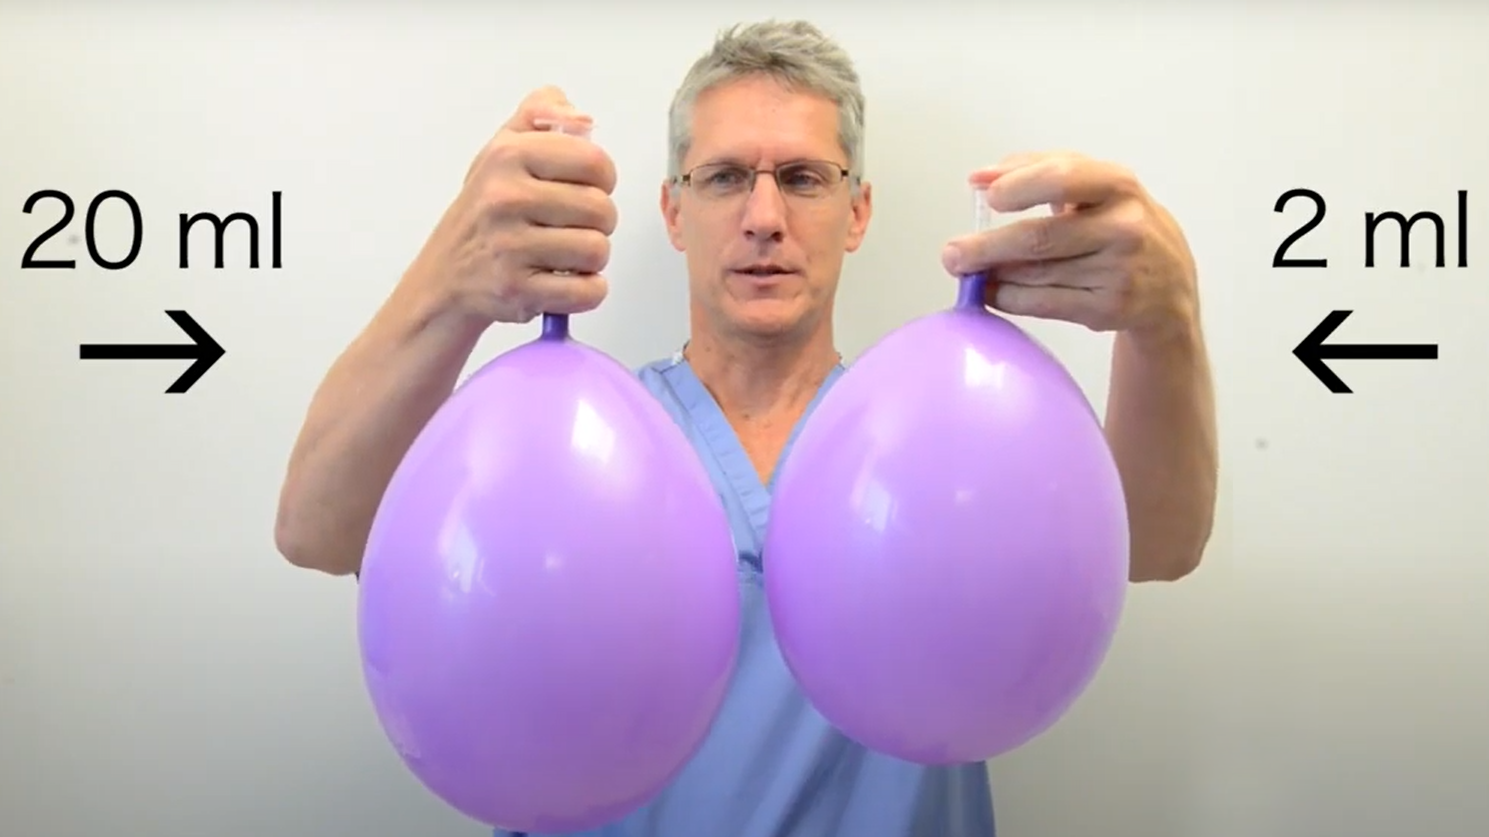 Photo Dr. Rechner holding two balloons